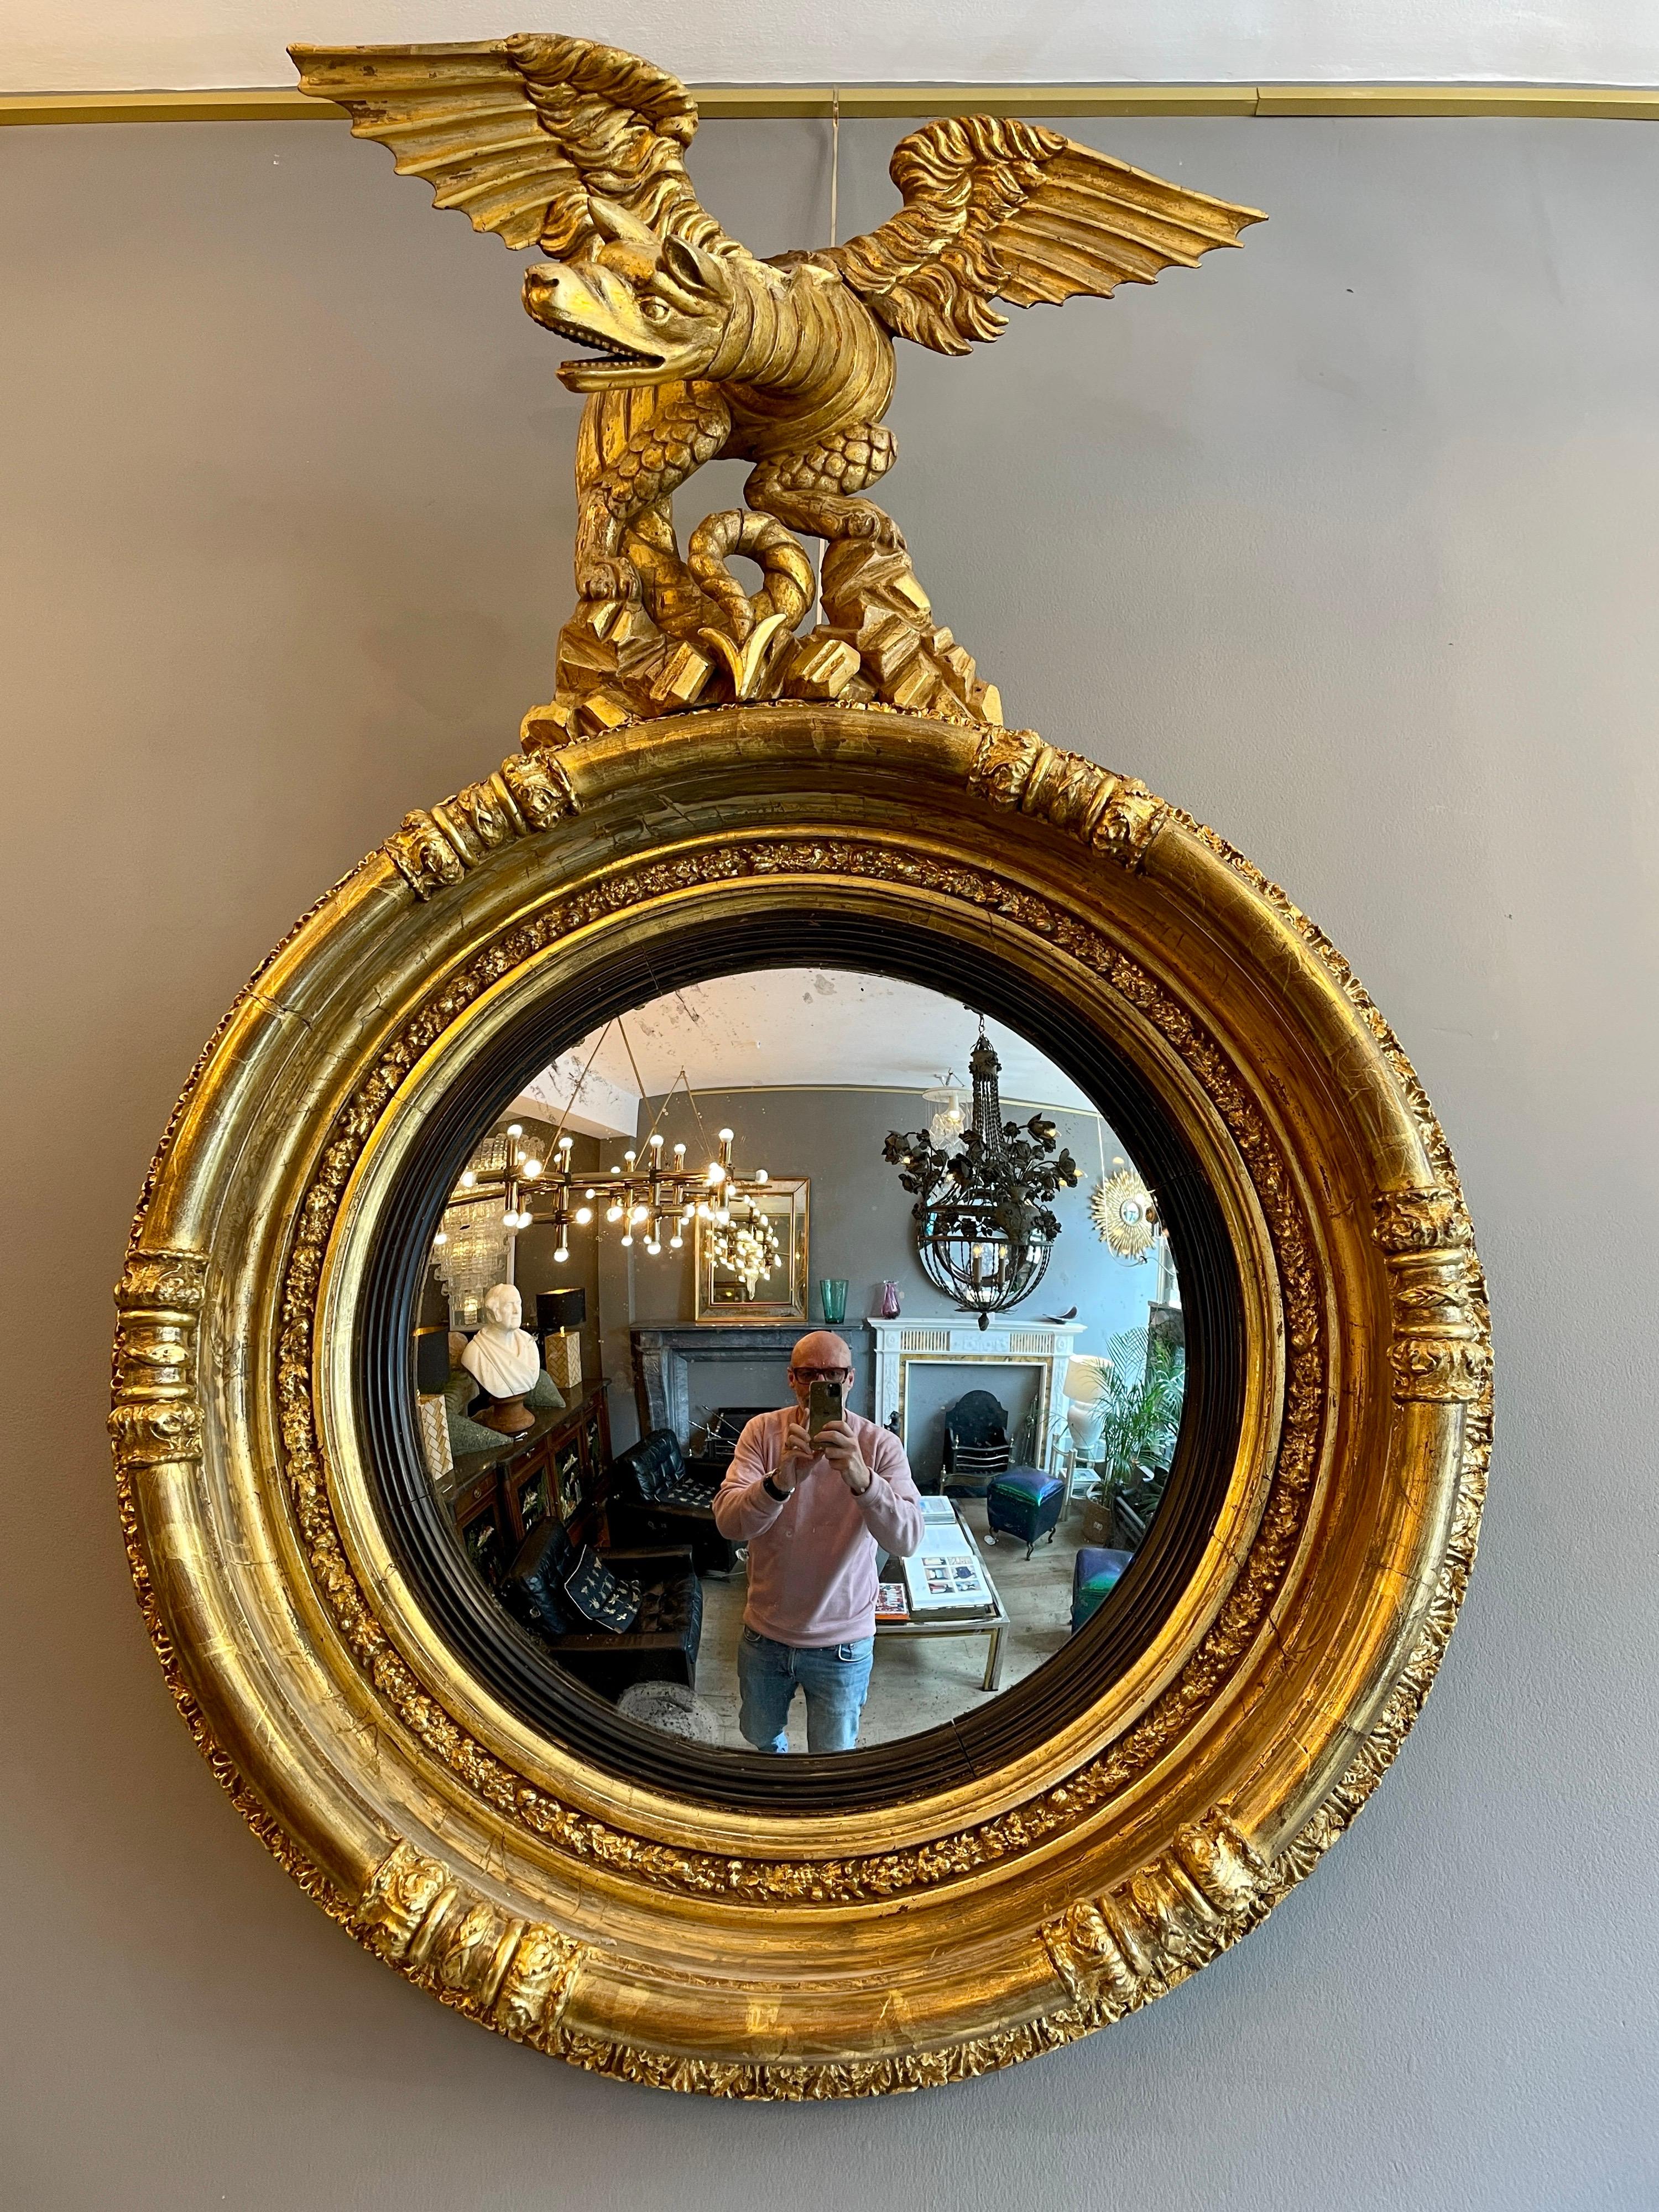 An exceptional Regency period convex carved wood, gilt and gesso convex mirror circa 1810. The carved wood pediment of perched dragon with spread wings and coiled serpent tail, cresting a deeply moulded and ornate frame decorated with outer and